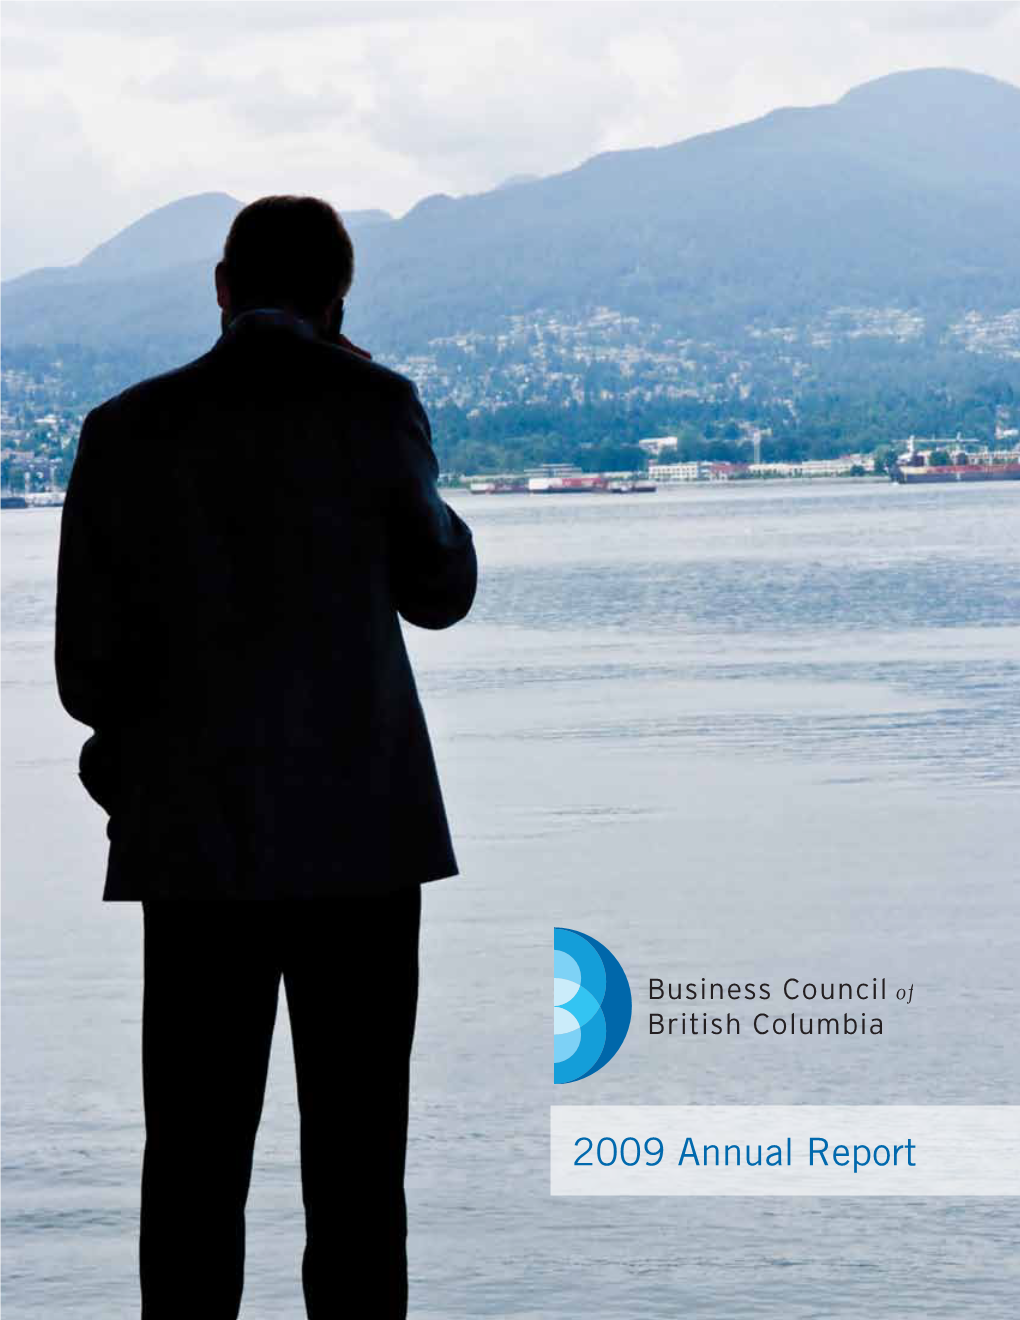 2009 Annual Report Mission Statement Our Mission Is to Build a Competitive and Growing Economy That Provides Opportunities for All Who Invest, Work, and Live In